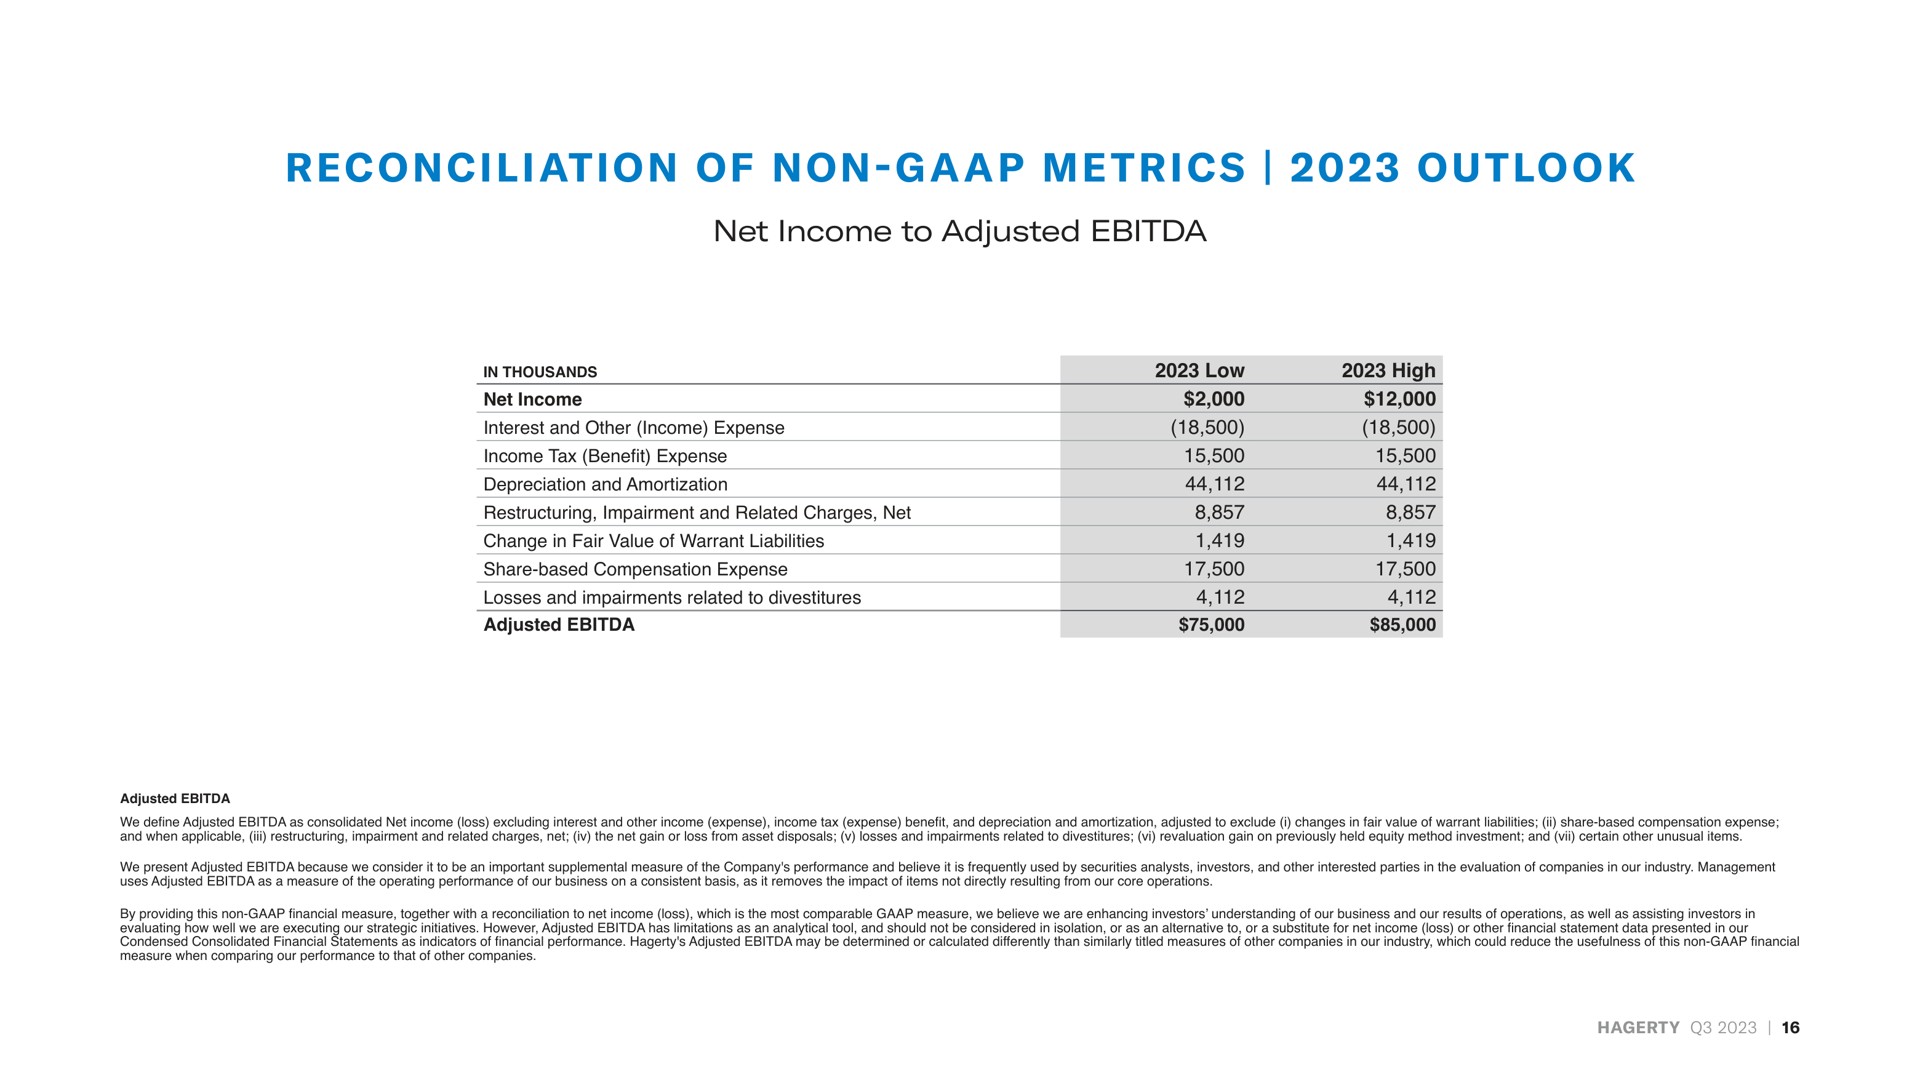 on ion of non a a i net income to adjusted reconciliation non metrics outlook | Hagerty